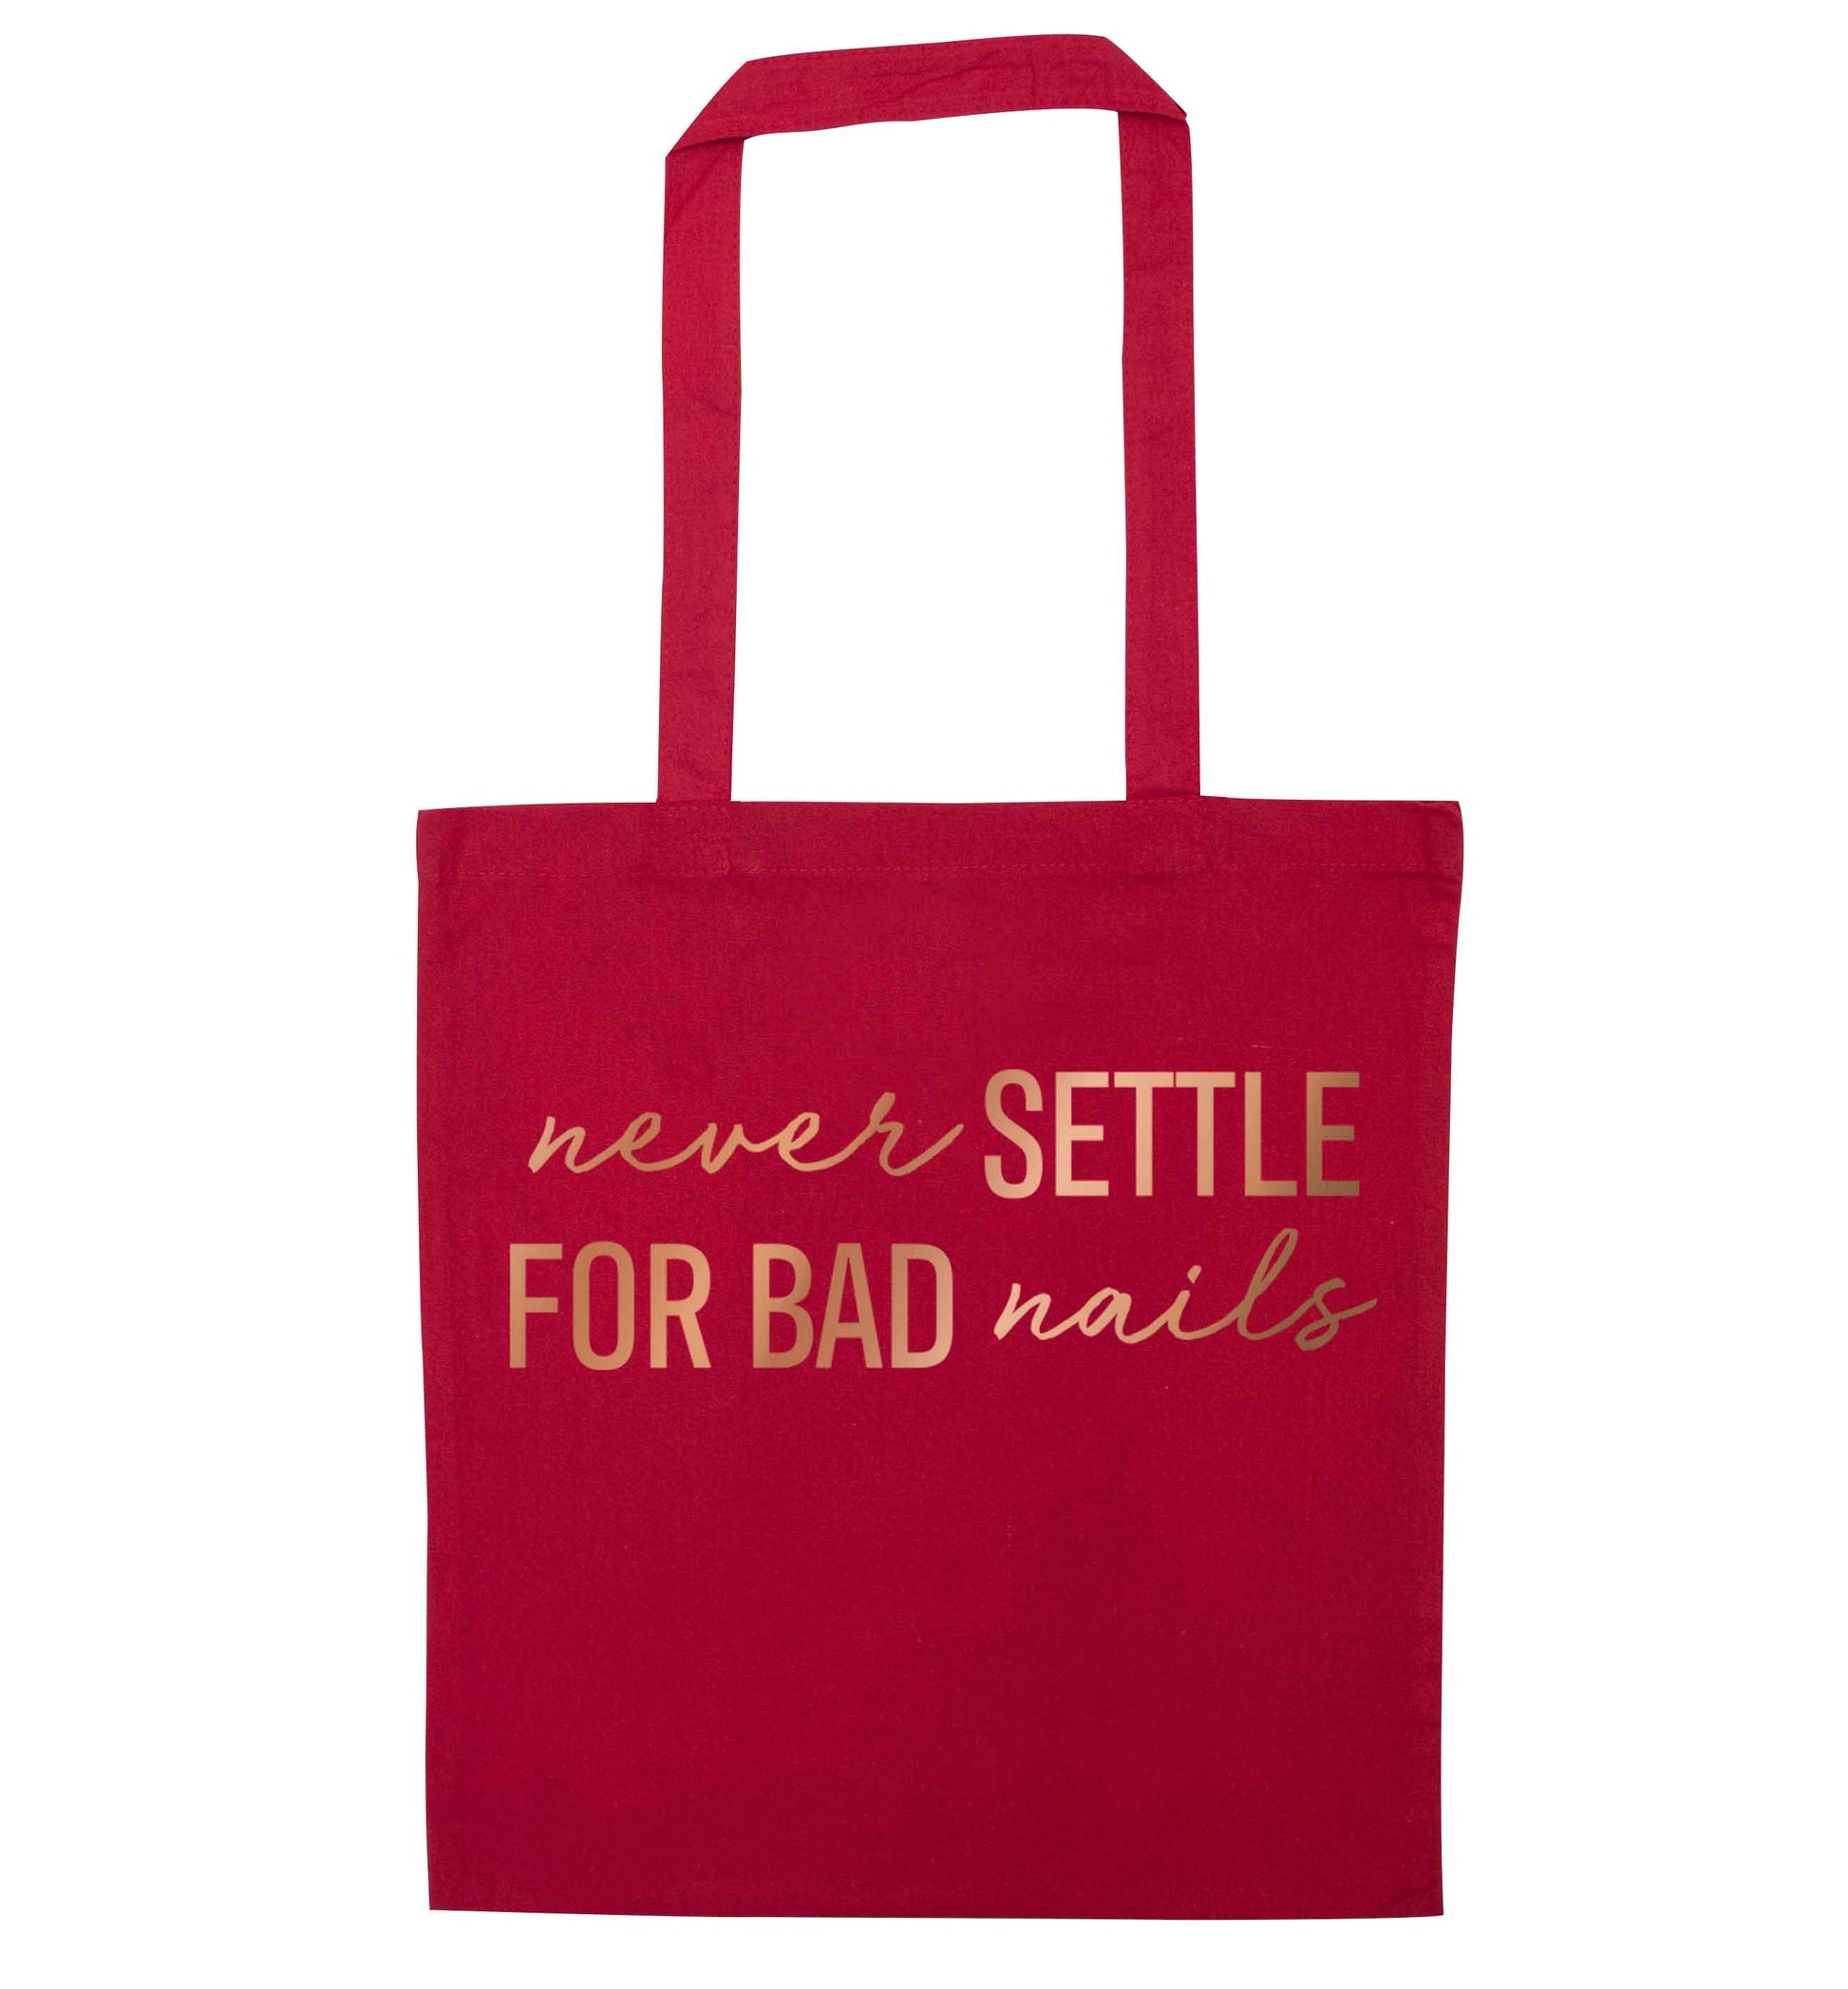 Never settle for bad nails - rose gold red tote bag